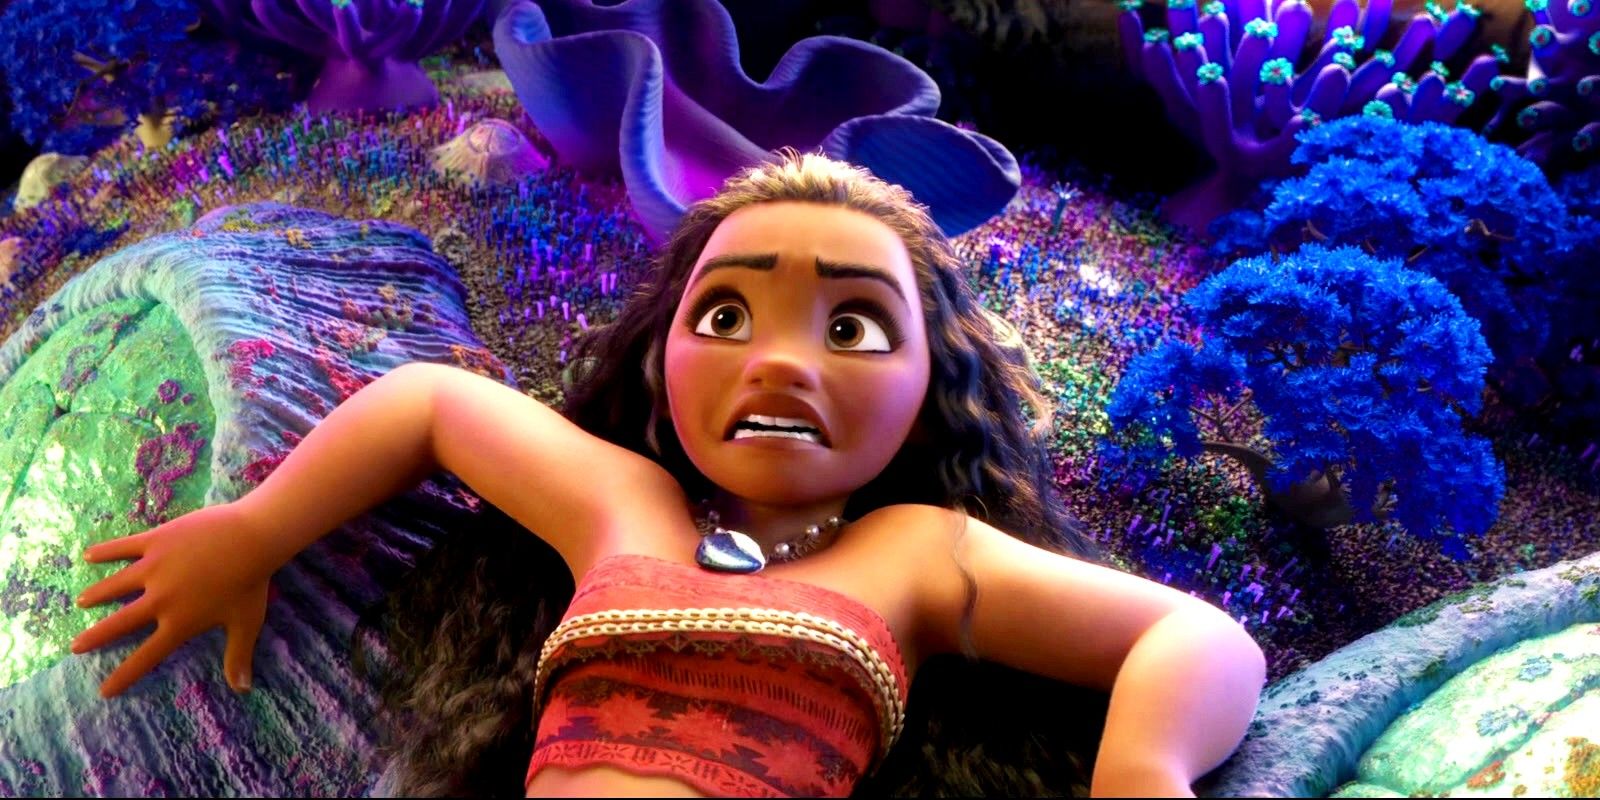 Moana live-action release date speculation, Cast and latest news